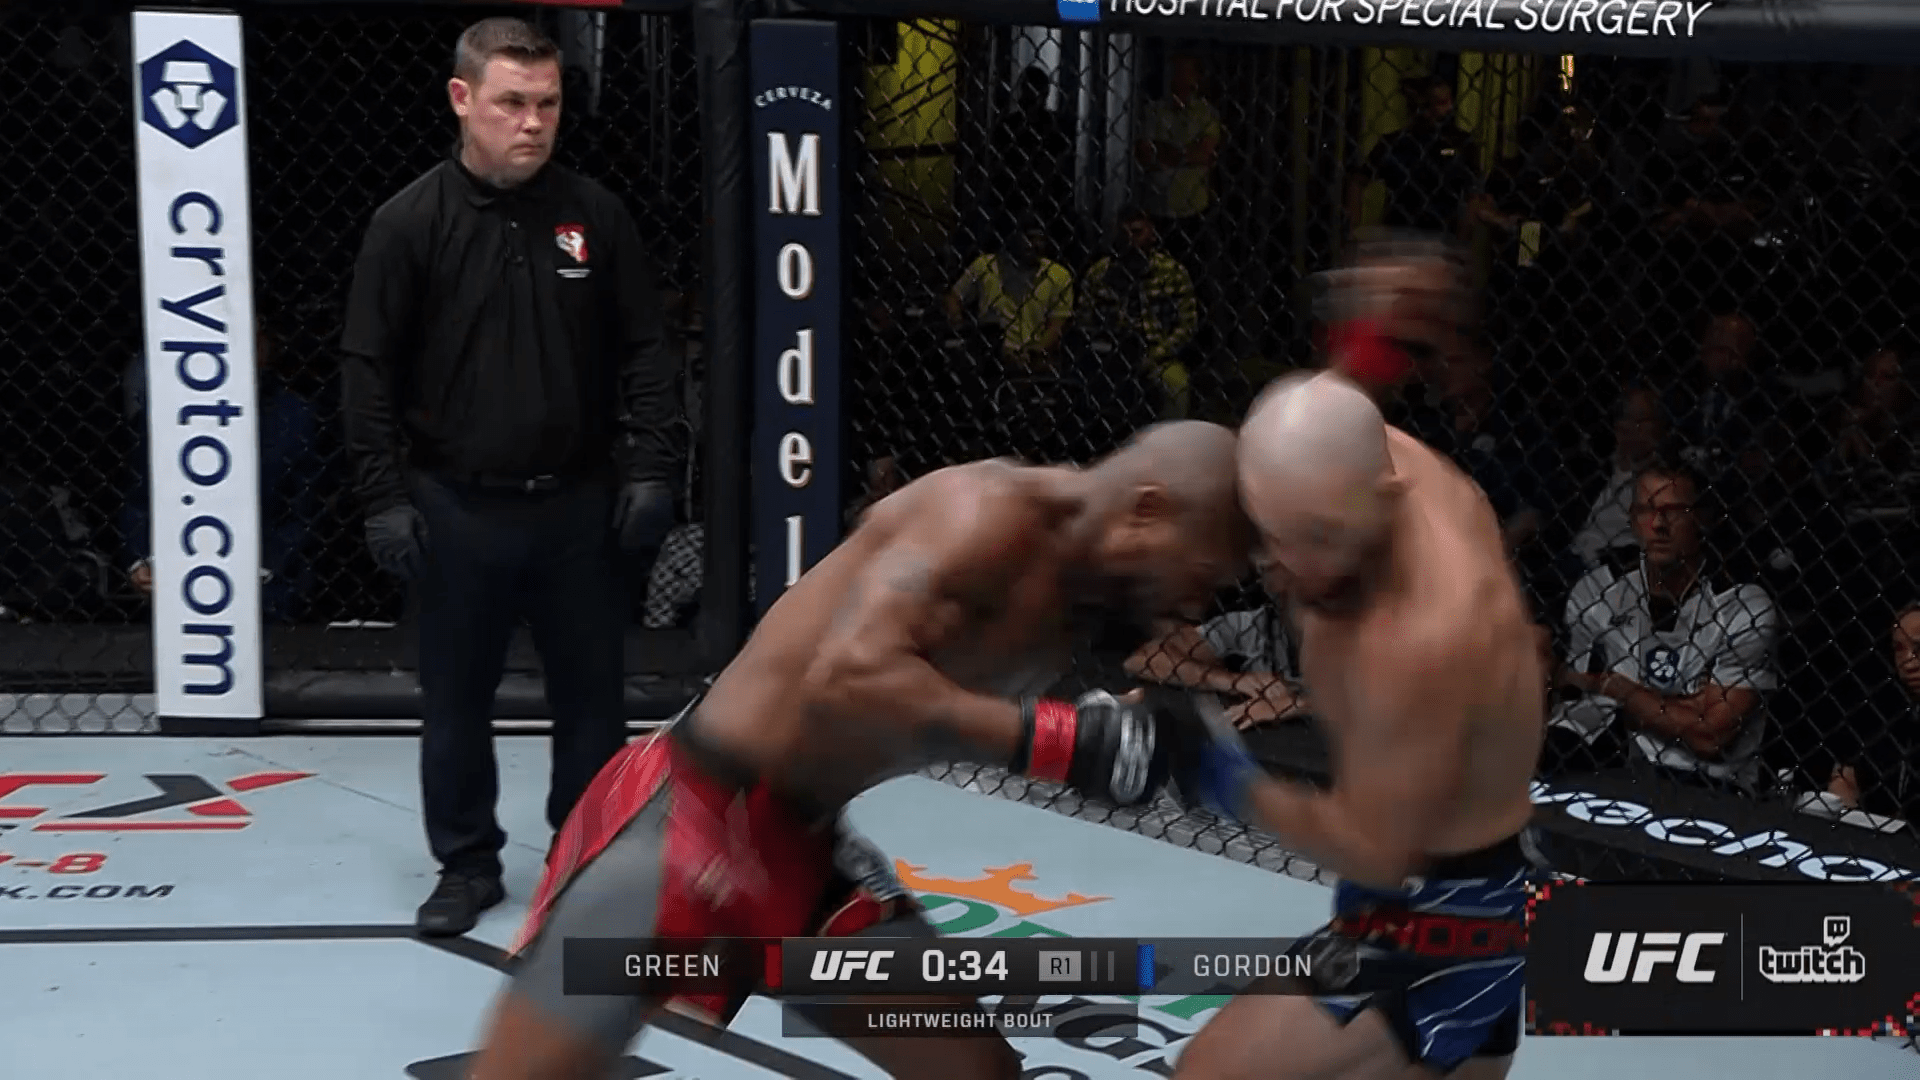 Bobby Green’s Retirement Fight Spoiled By No Contest Against Jared Gordon